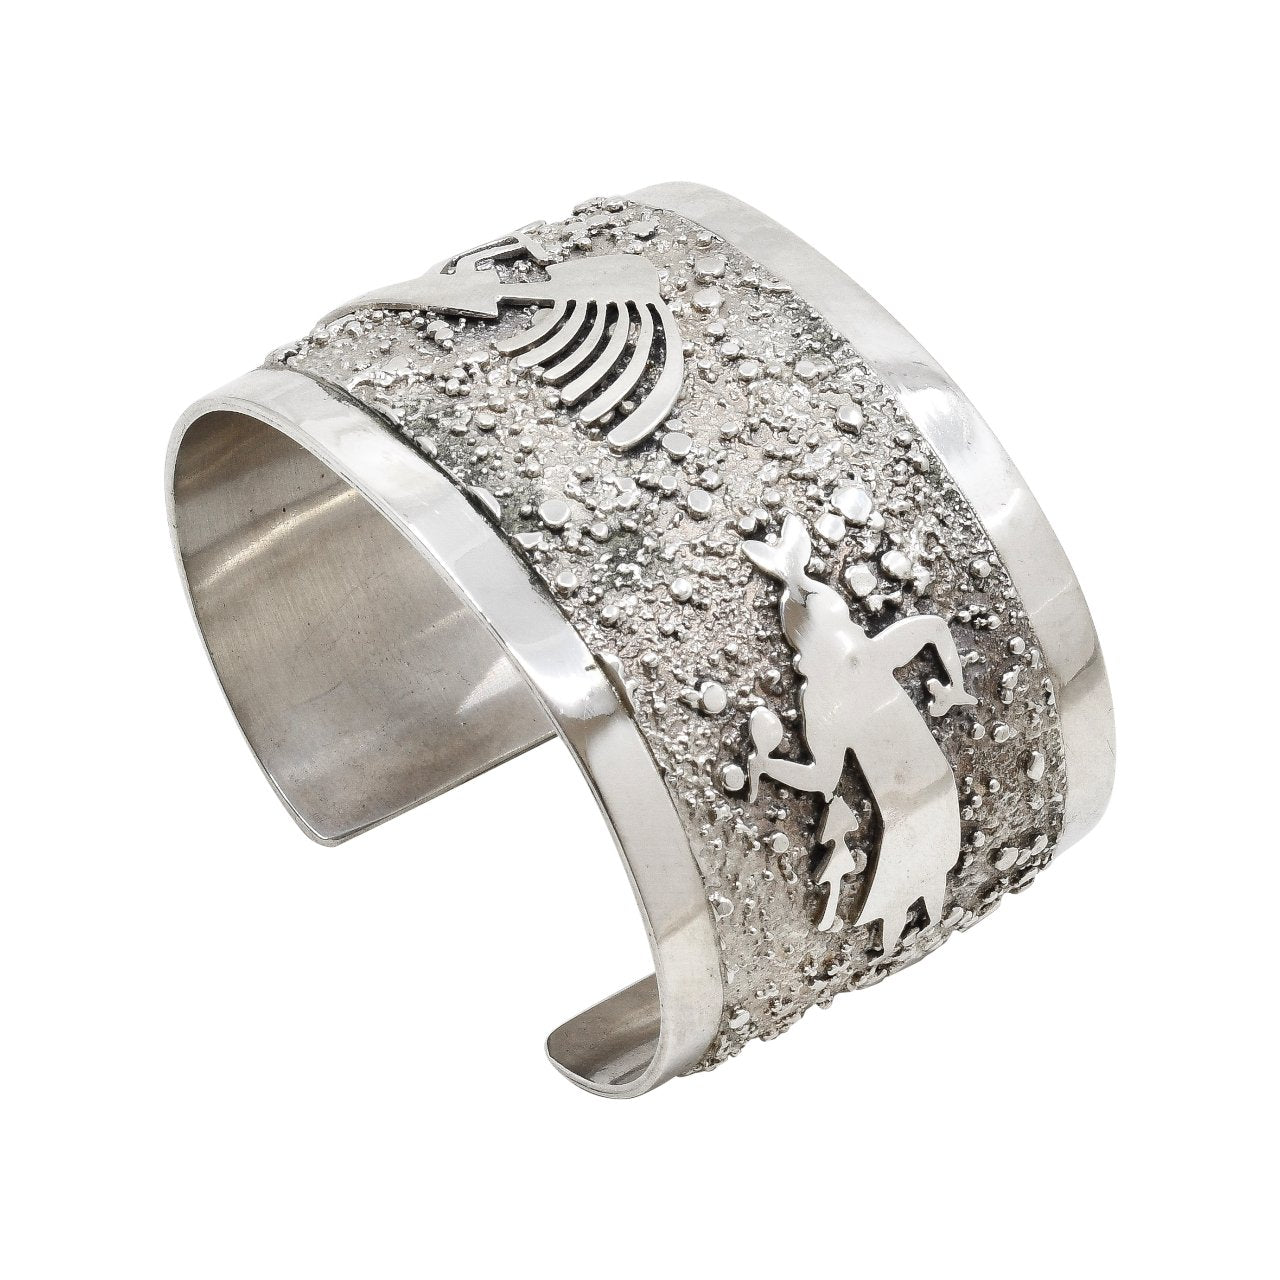 Richard Begay Silver Cuff With Navajo Figures